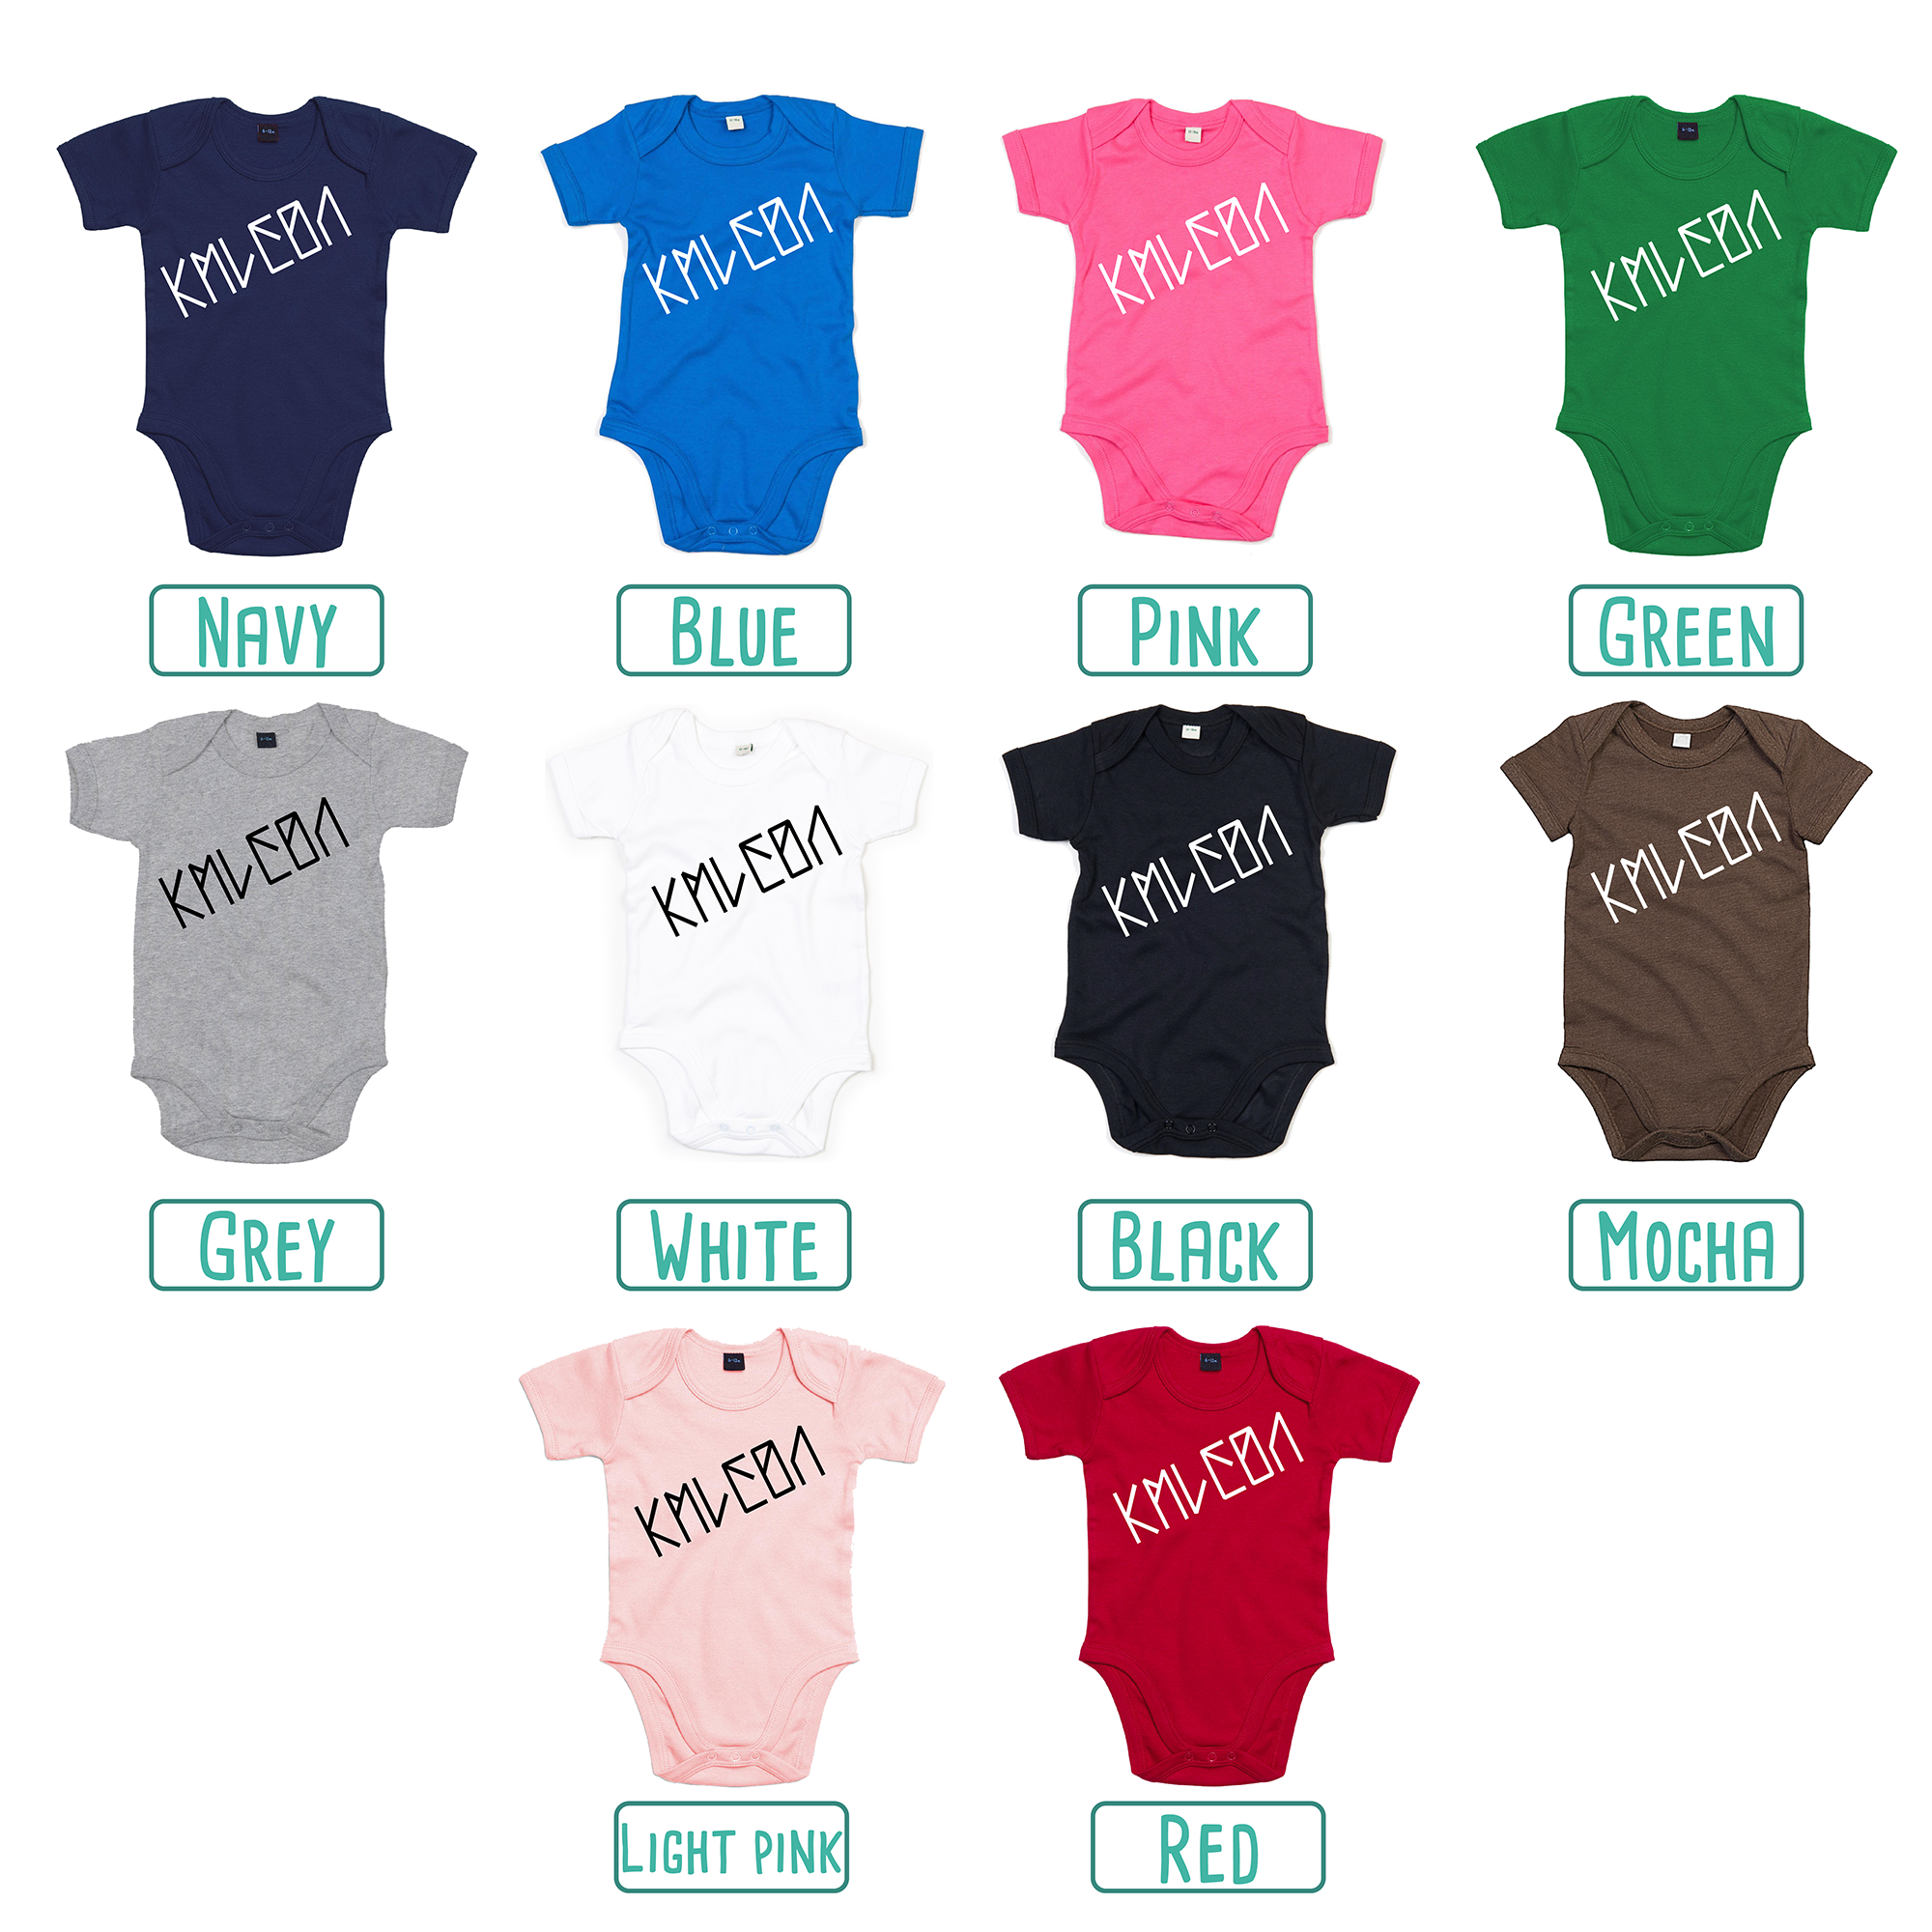 Colour options for baby or toddler bodysuits with short sleeves by KMLeon.